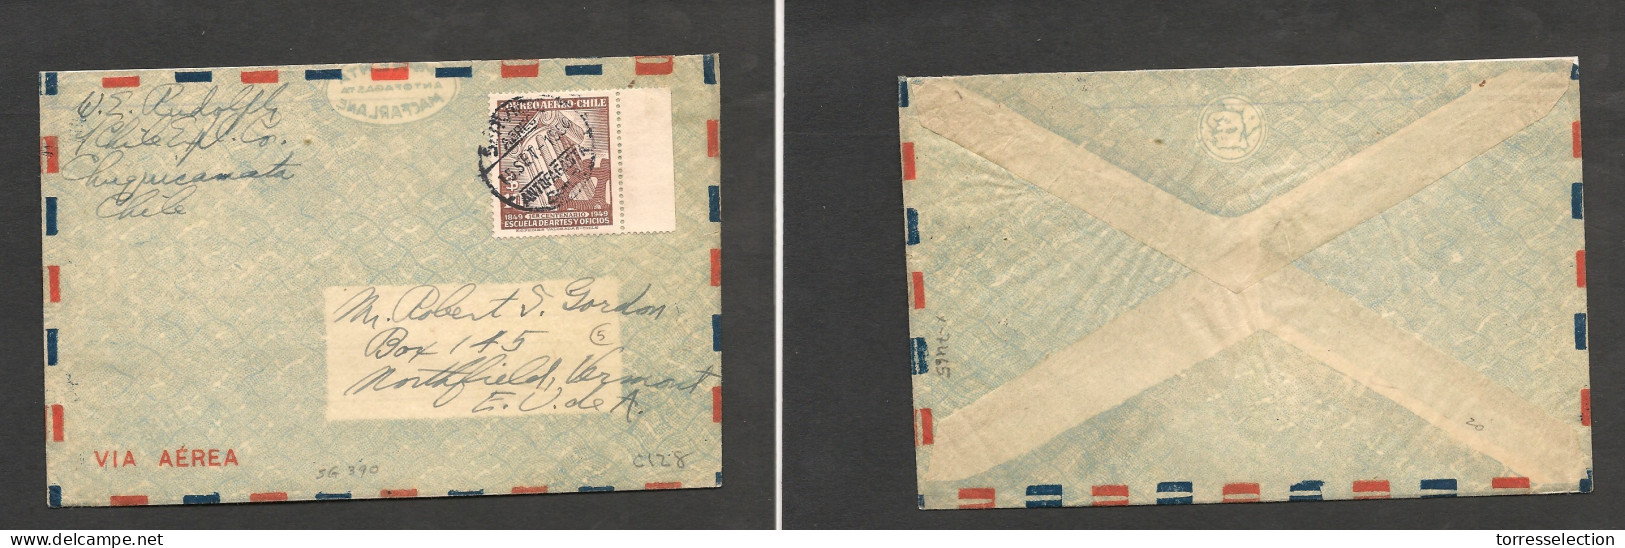 CHILE. Chile - Cover - 1950 15 Seppt Antofagasta To USA Northfield Vermont Single $10 Fkd Env Air Rate, Fine. Ex-Prof We - Chile